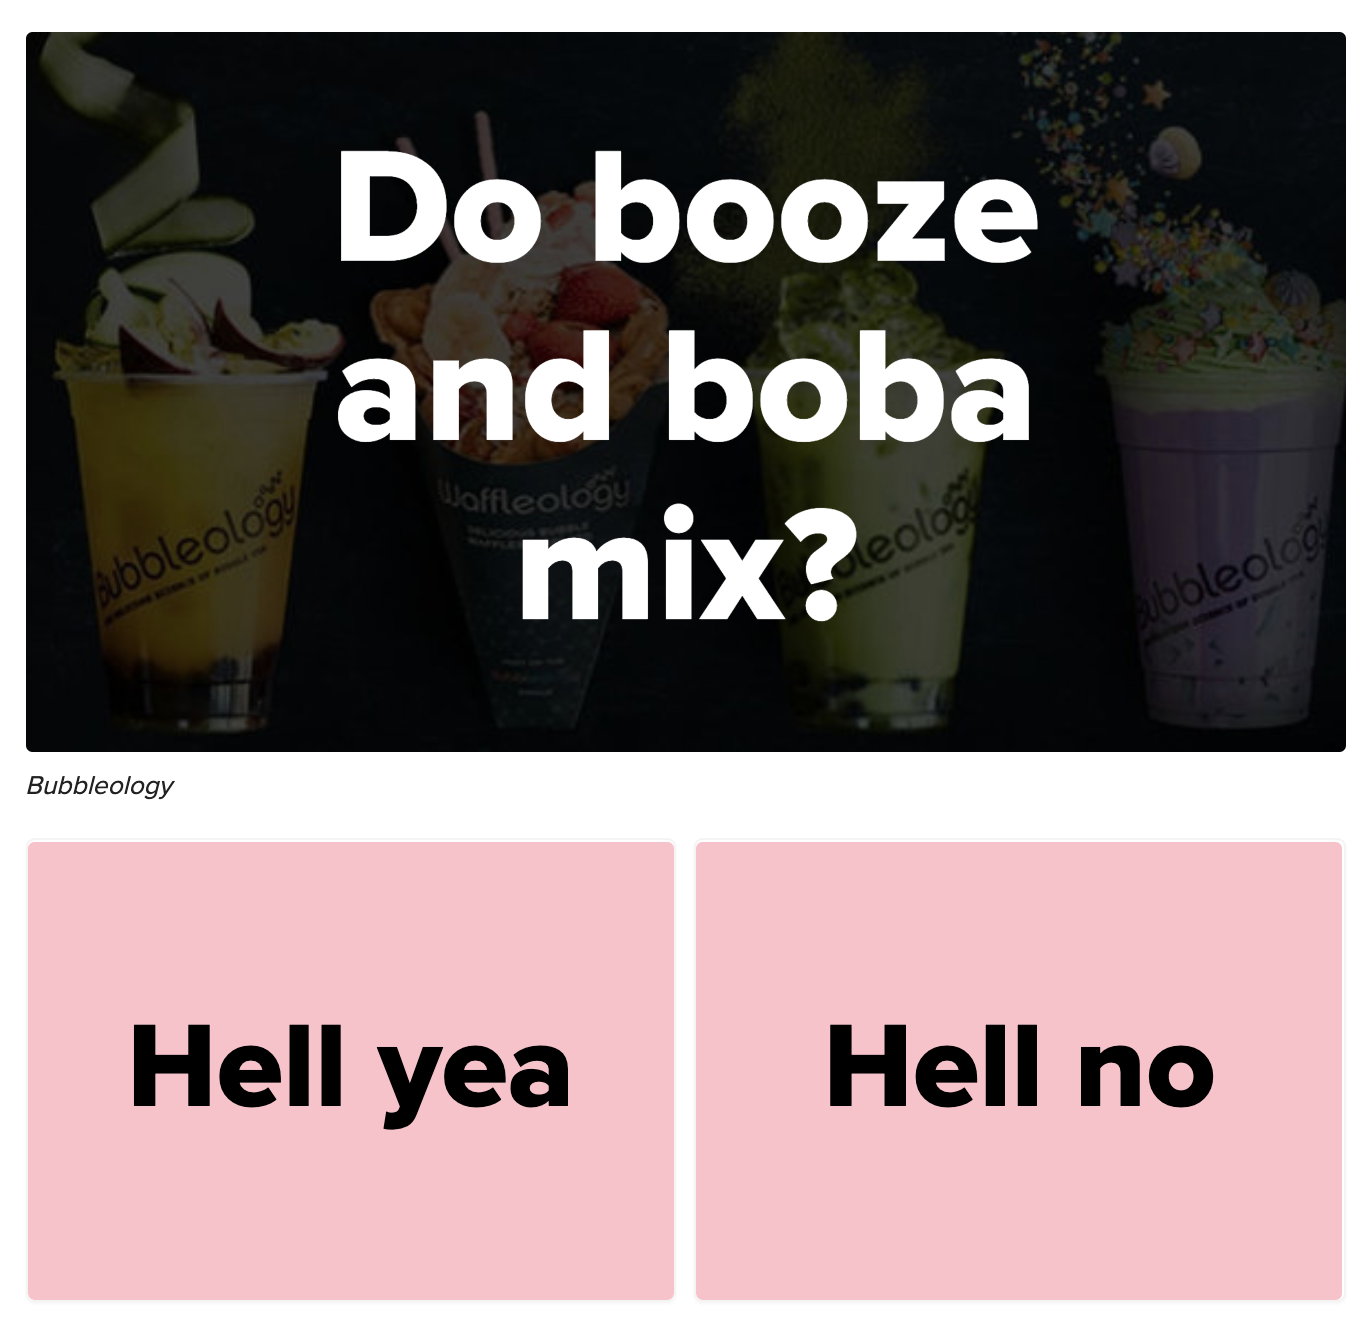 &quot;Do booze and boba mixed&quot; followed by options for &quot;hell yea&quot; and &quot;hell no&quot;